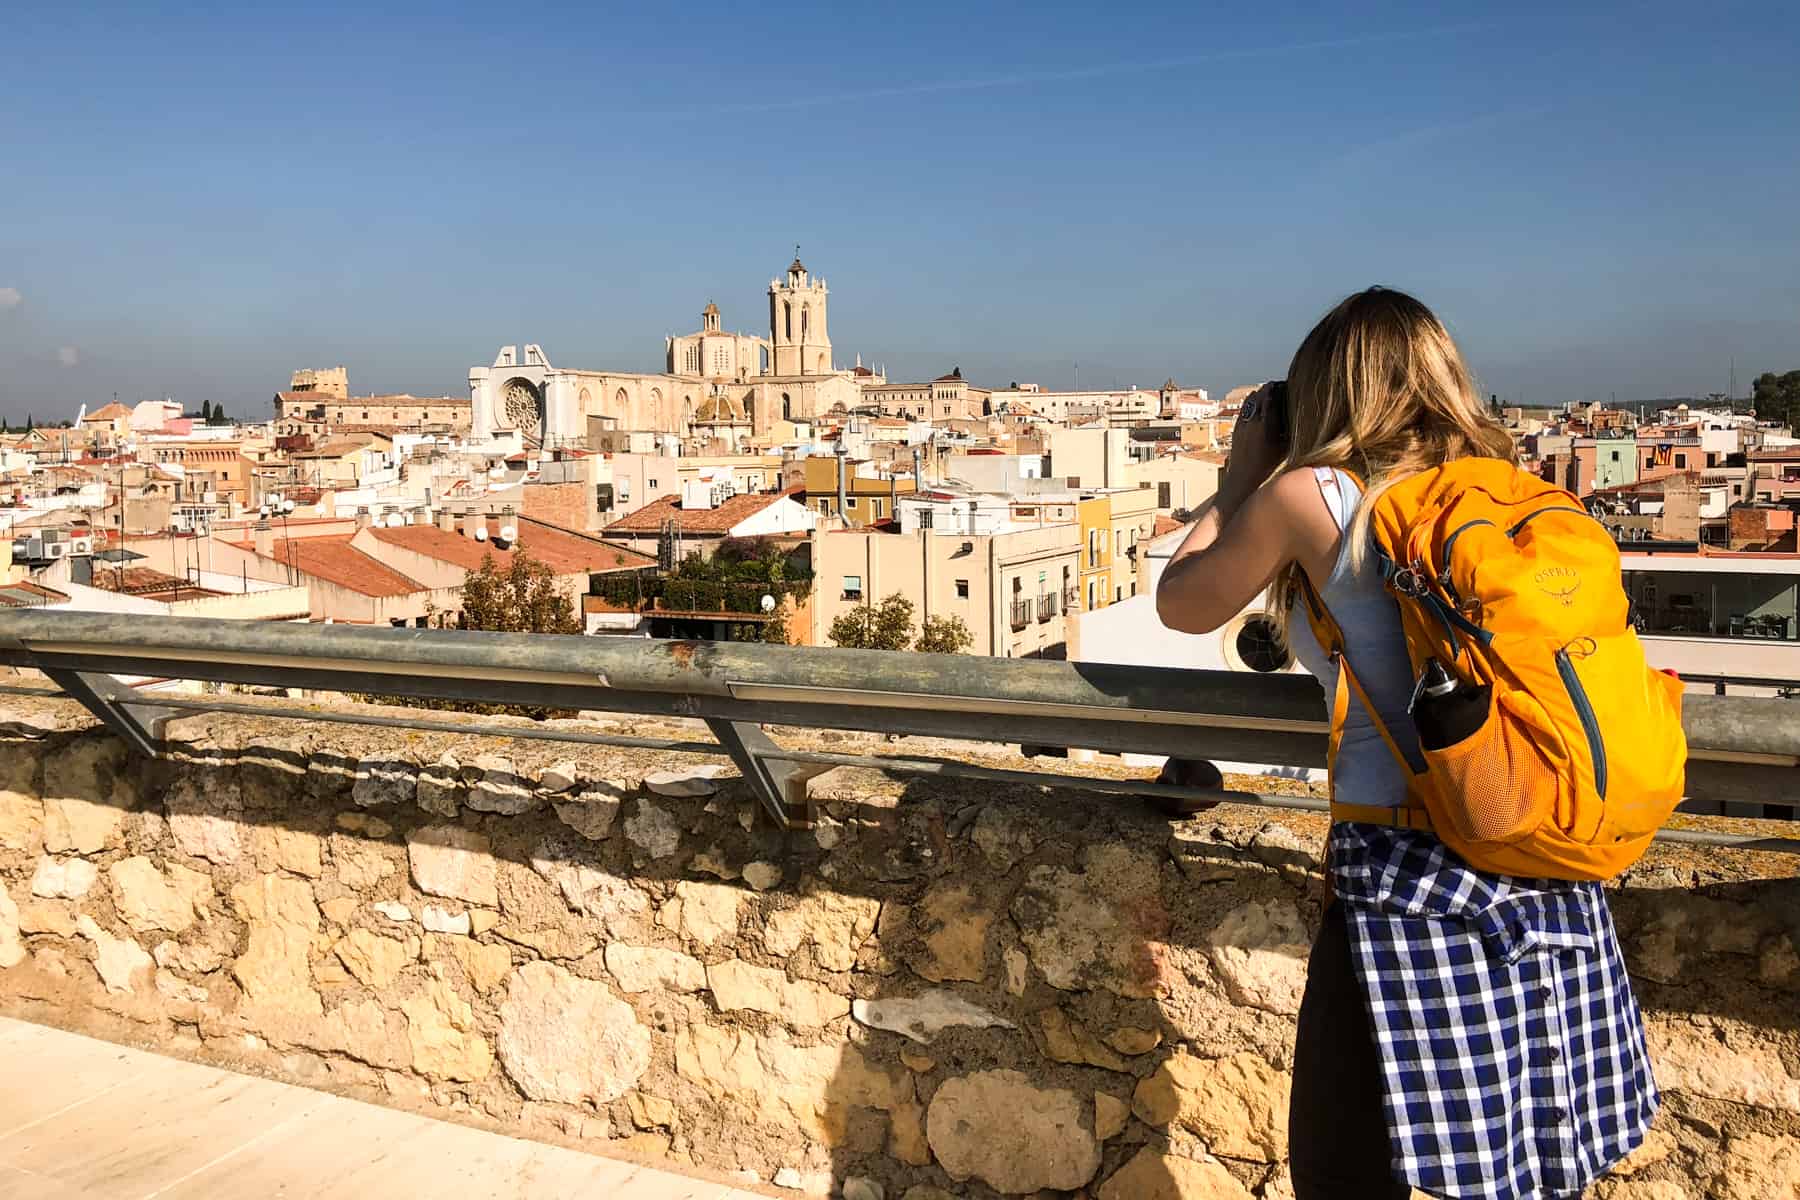 A woman wearing a yellow backpack takes a picture of the city of Tarragona from the top of the golden stone Roman Circus building